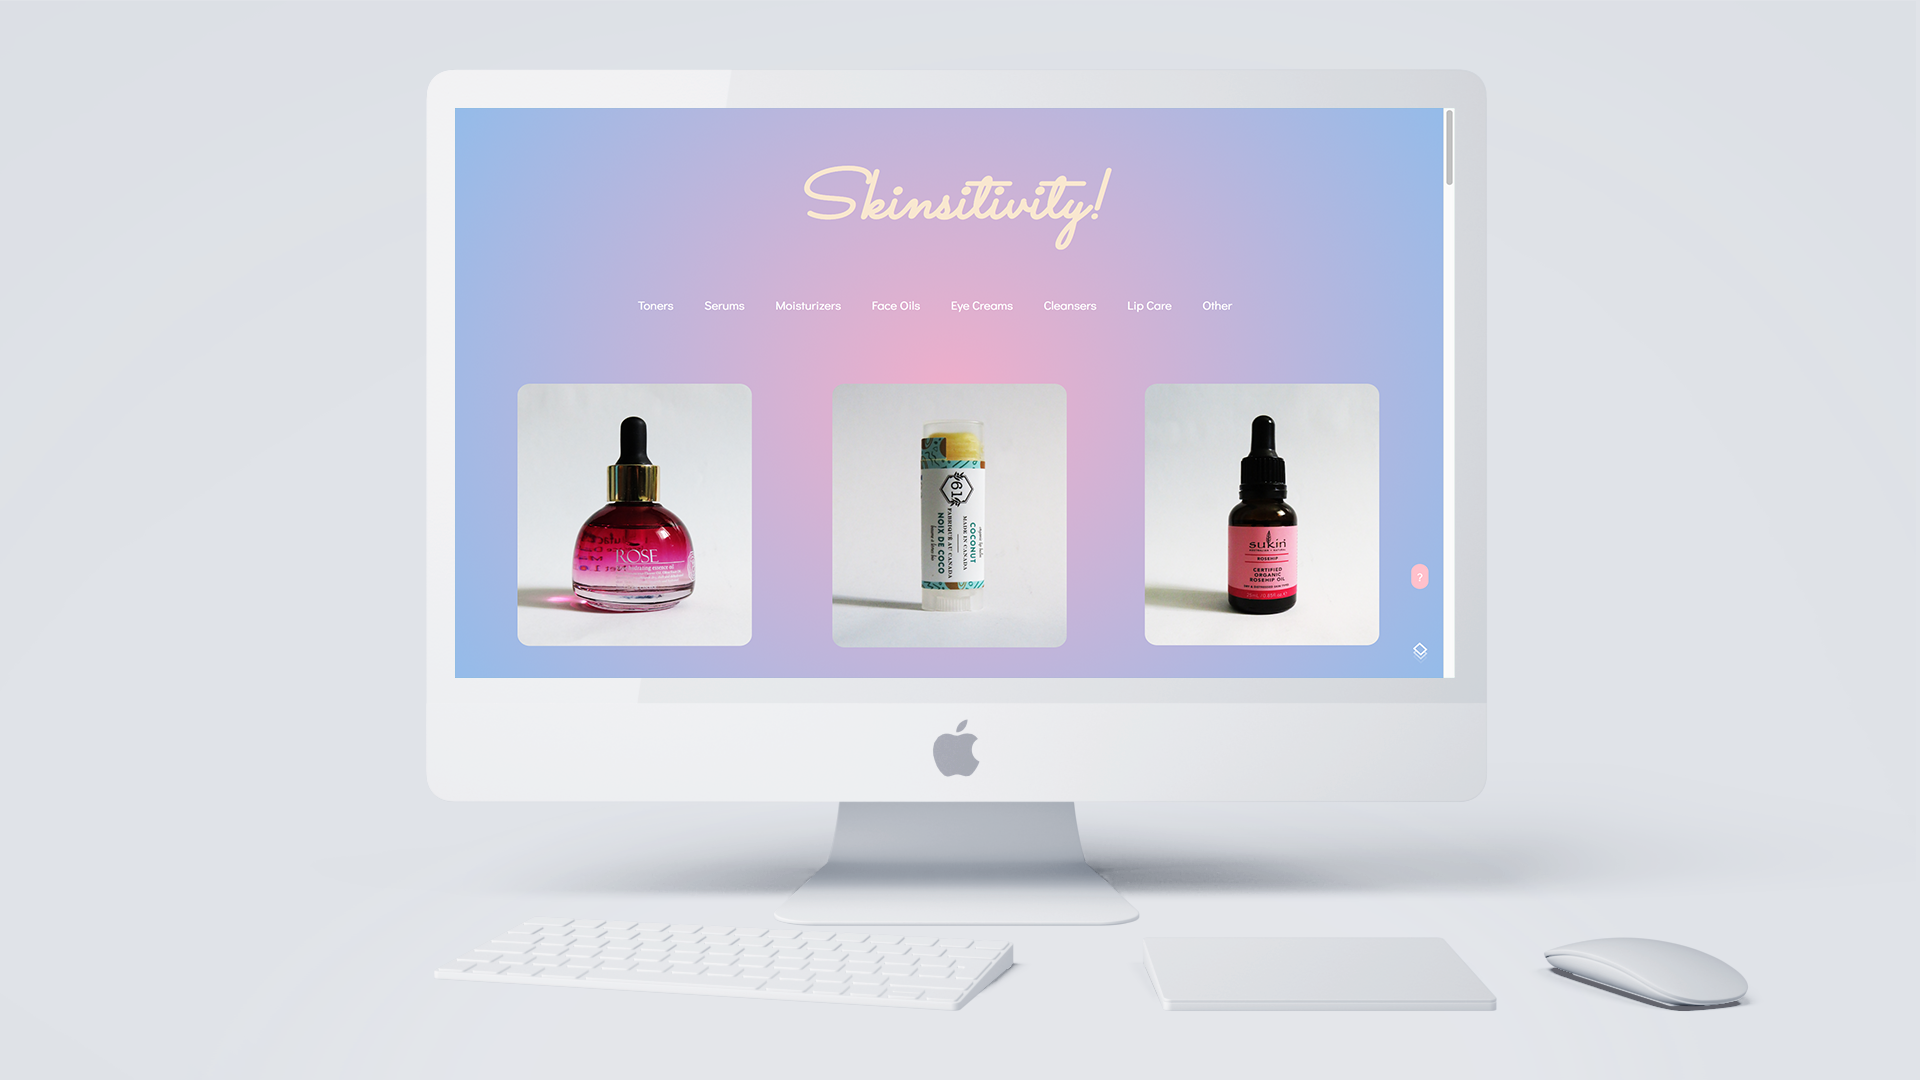 The Skinsitivity homepage includes a navigation bar so that there is a better ease of use for visitors who are searching for specific products.